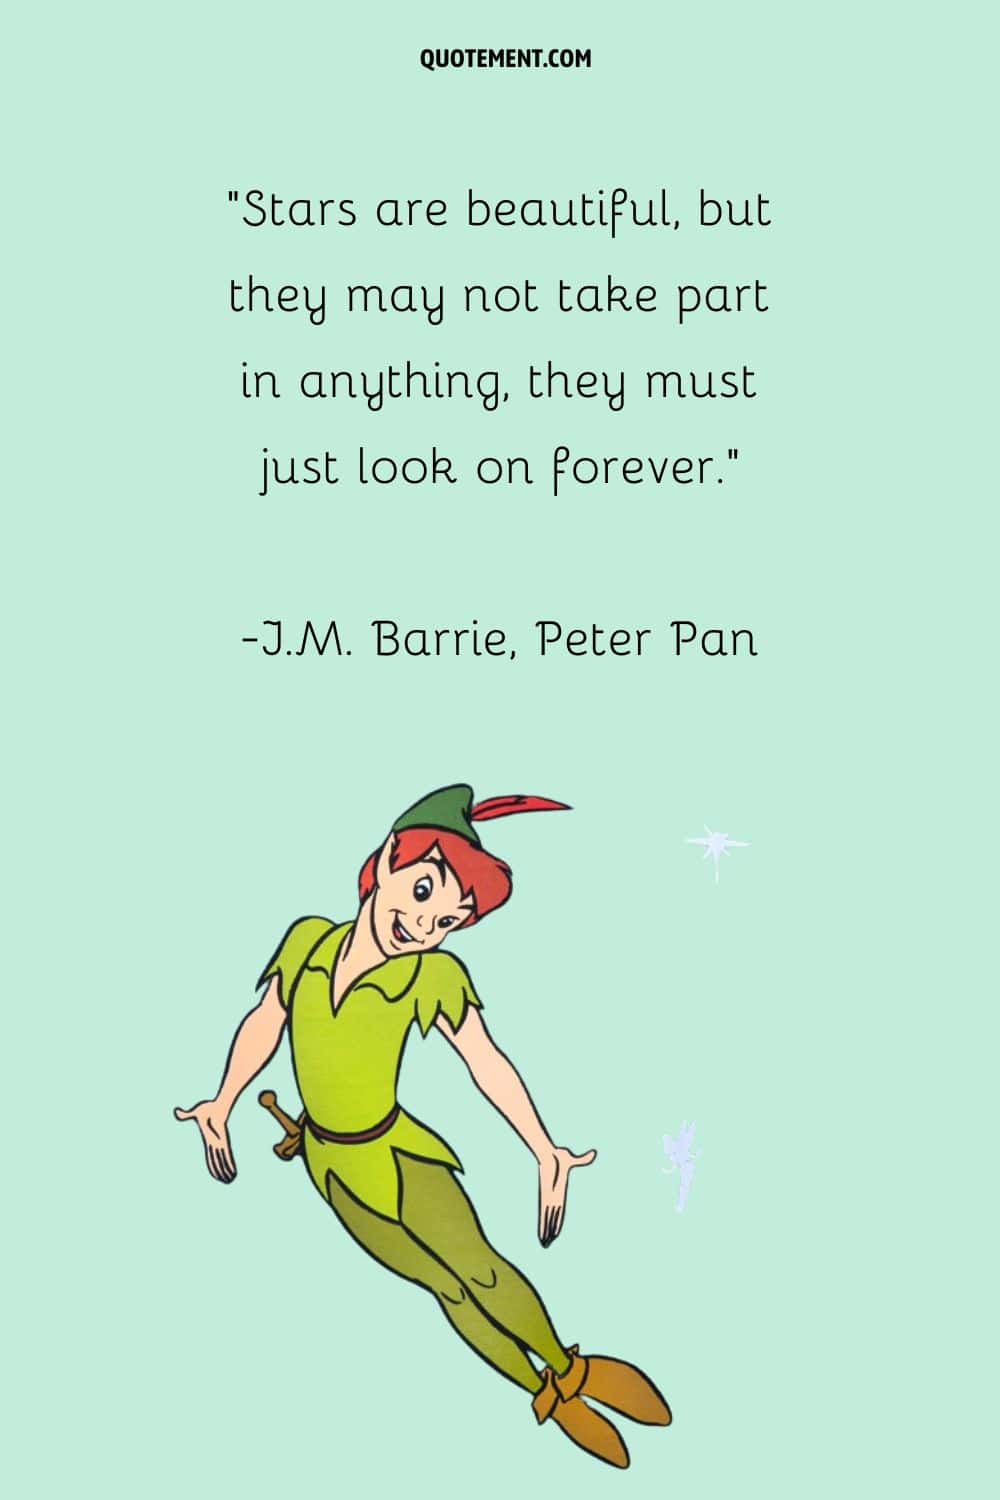 “Stars are beautiful, but they may not take part in anything, they must just look on forever.” ― J.M. Barrie, Peter Pan